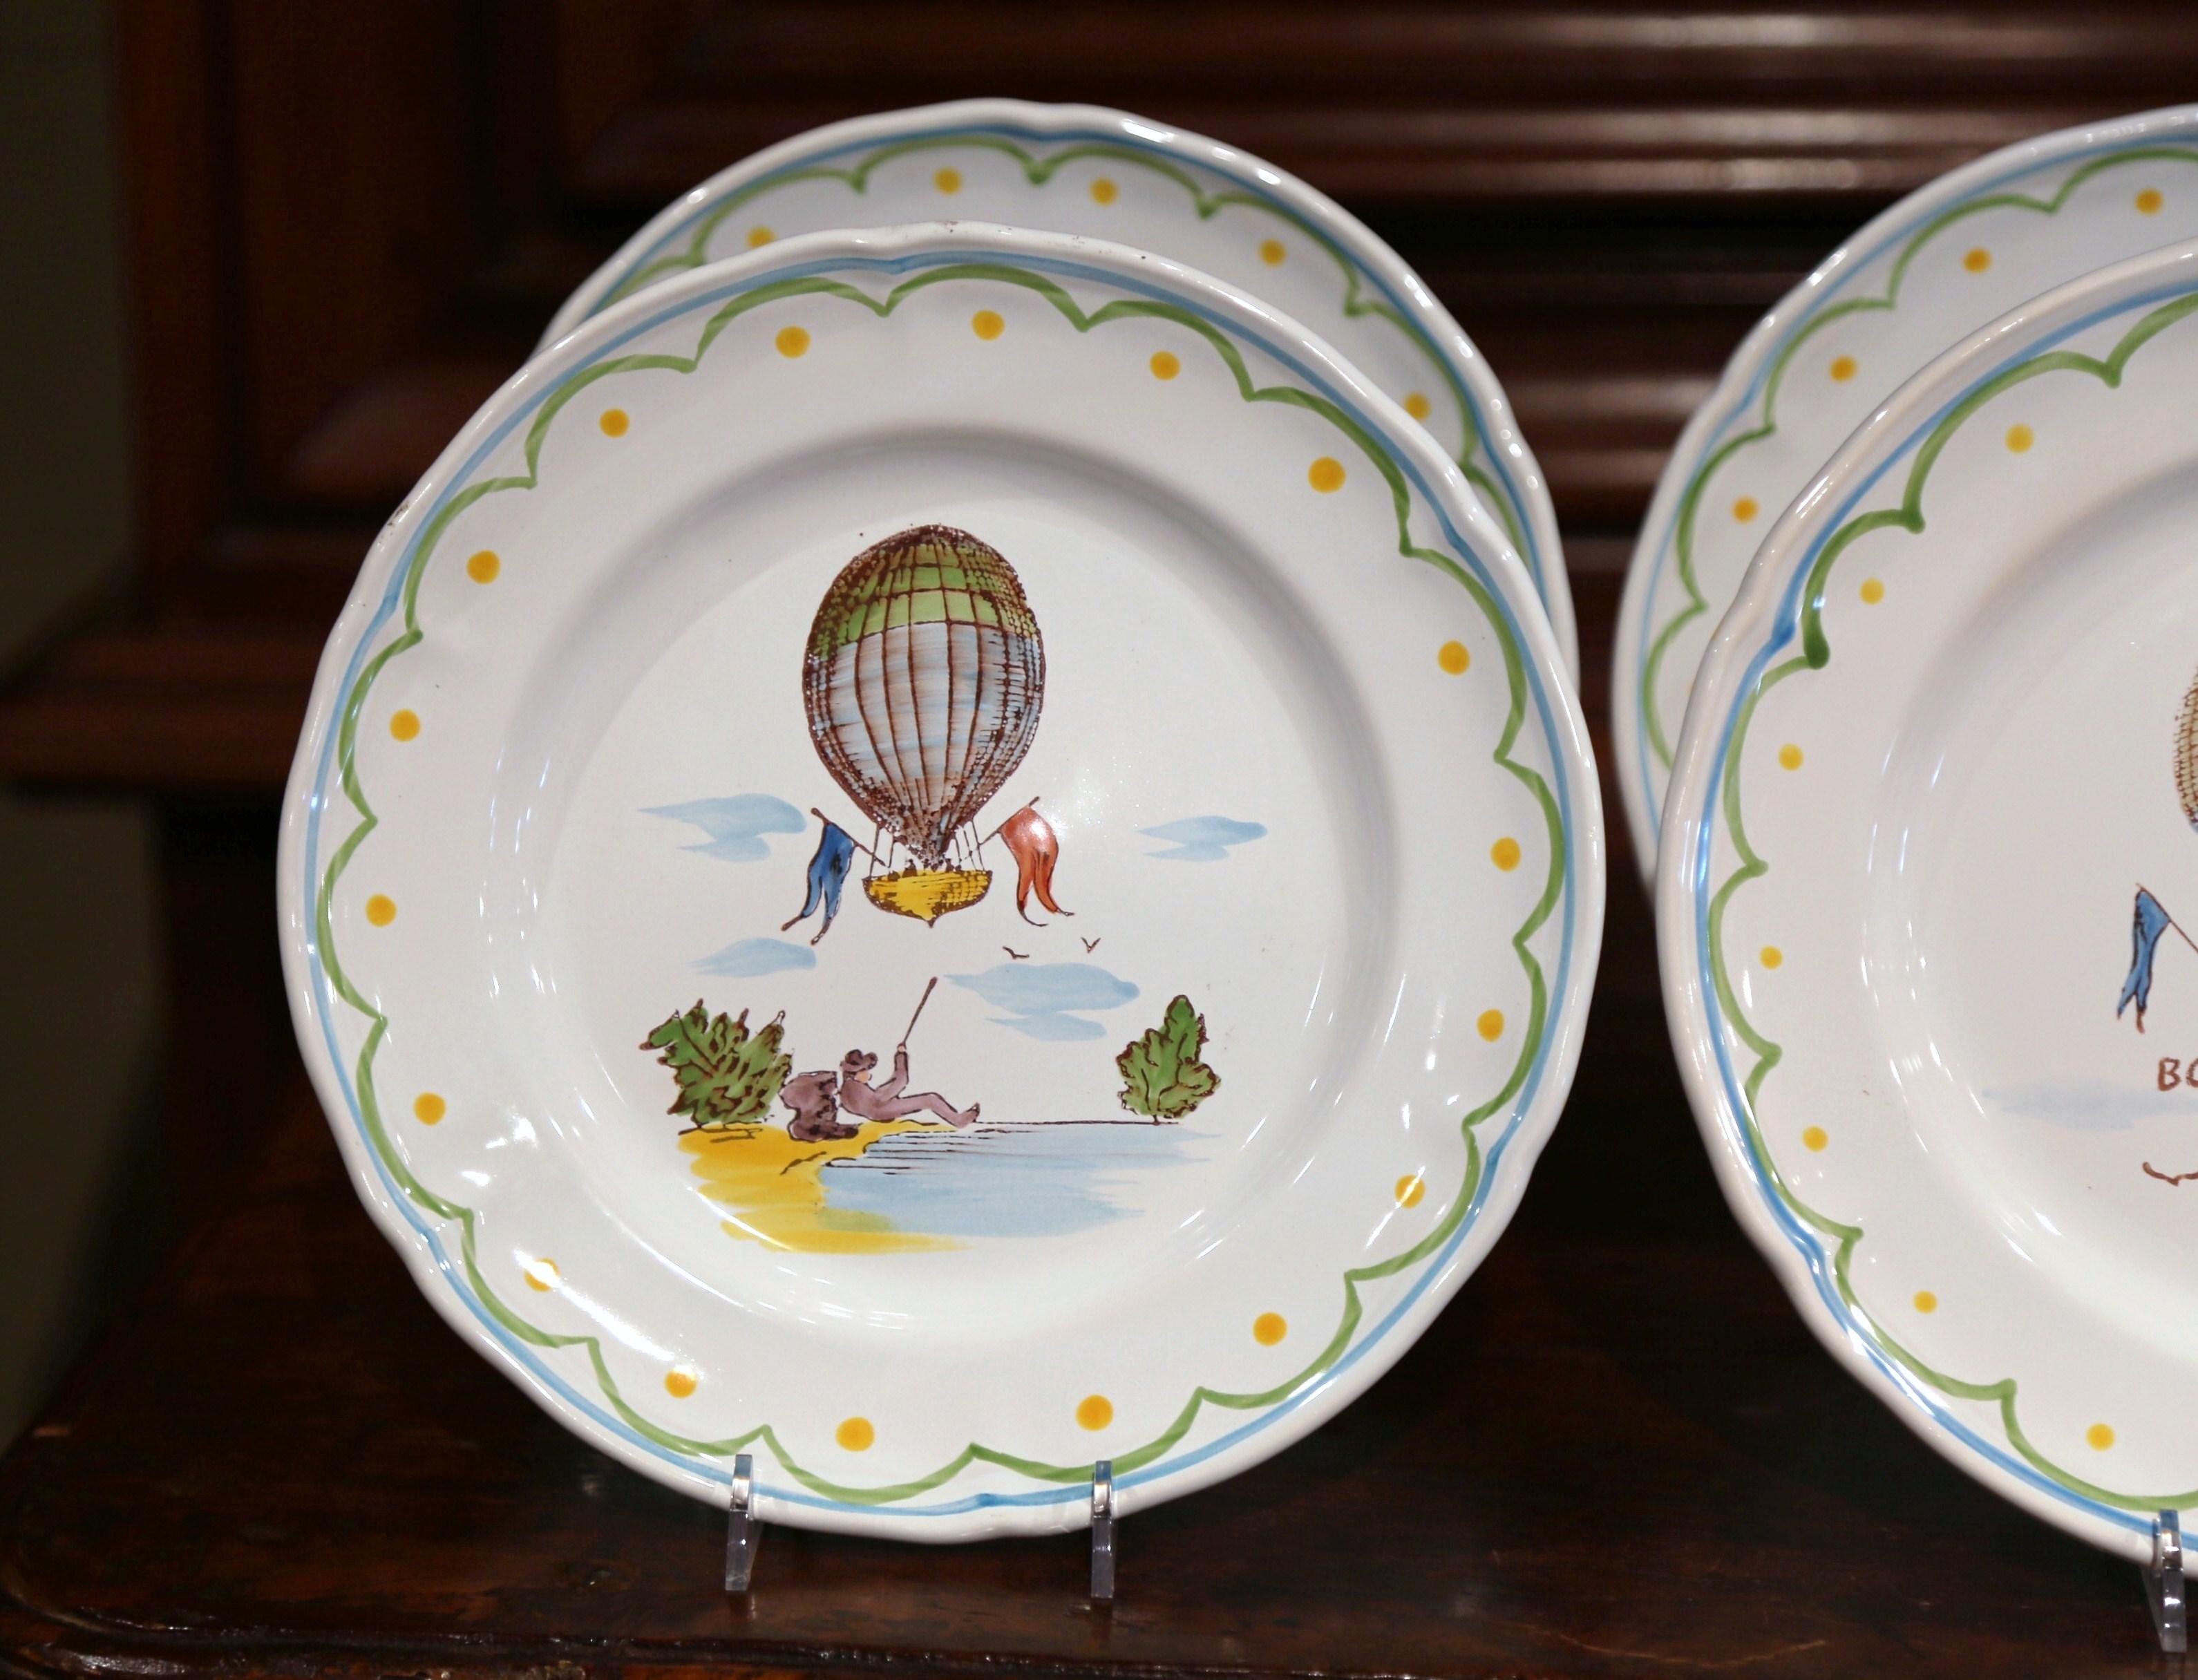 Set of Six French Hand Painted Ceramic Hot Air Balloon Plates from Brittany 1